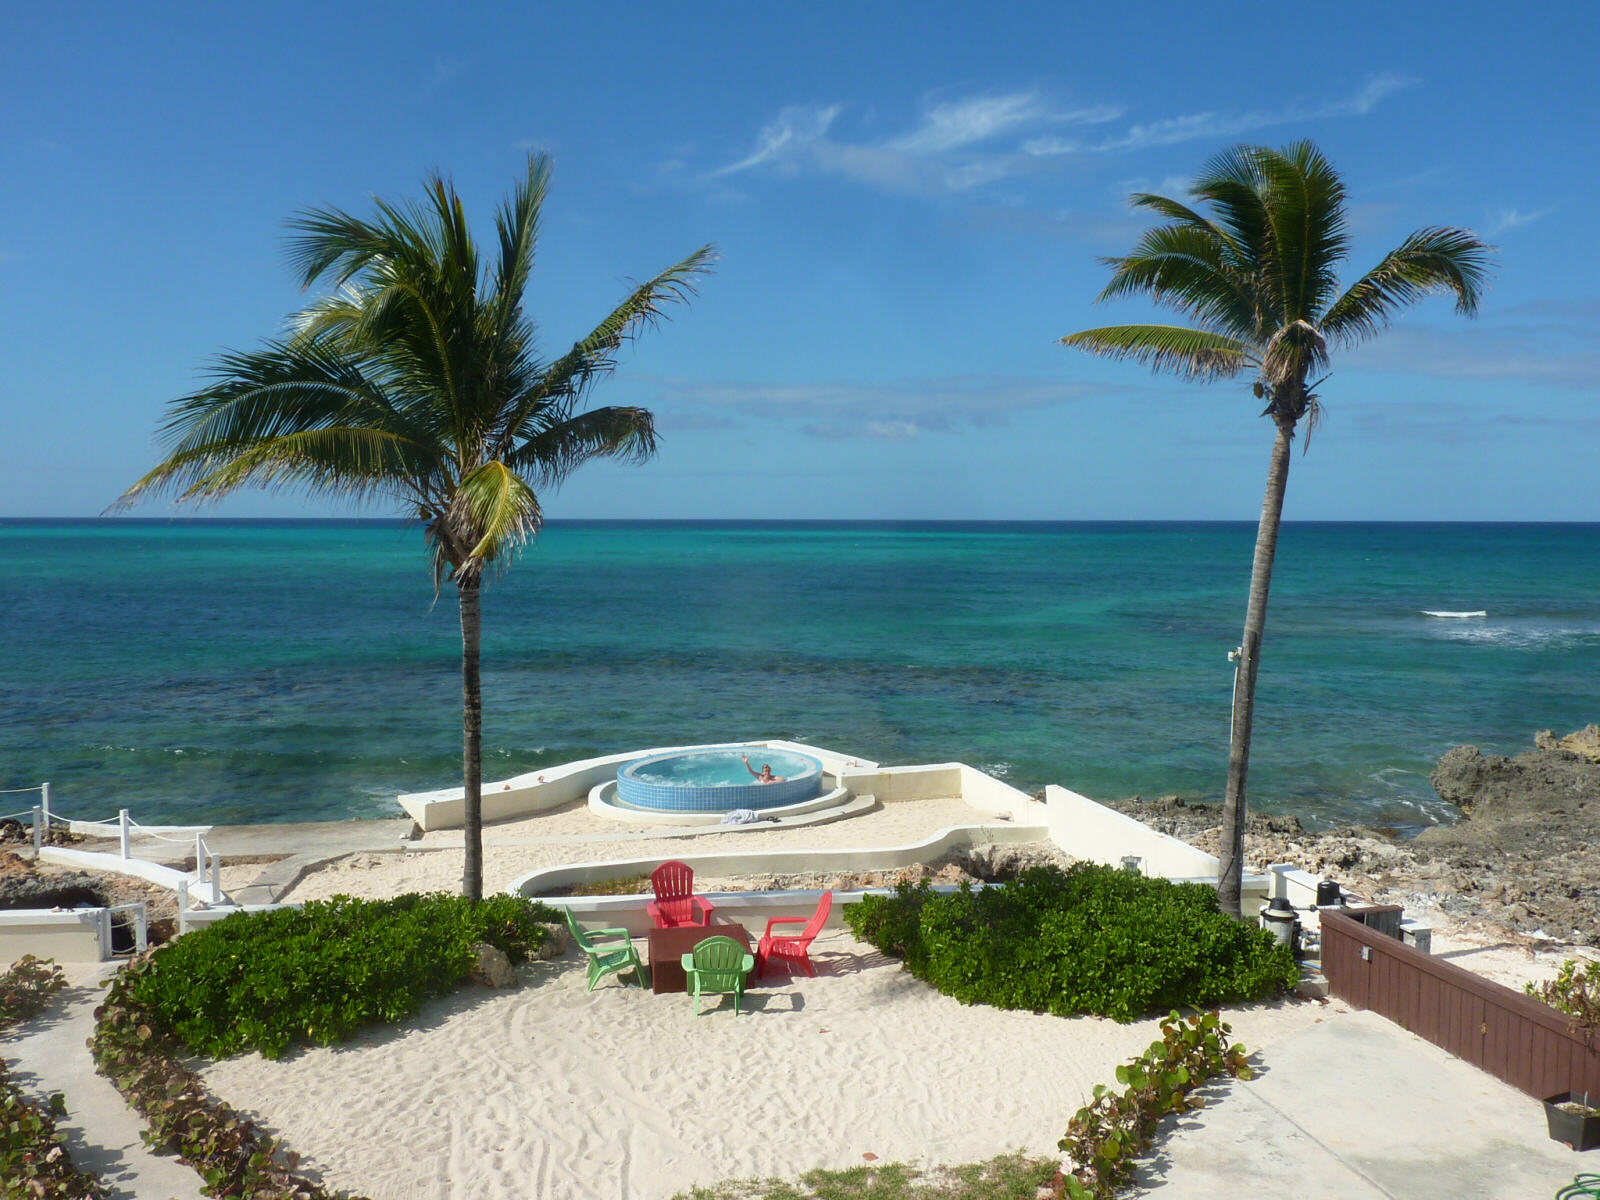 The jacuzzi at the beach house at Sandy Port, Nassau